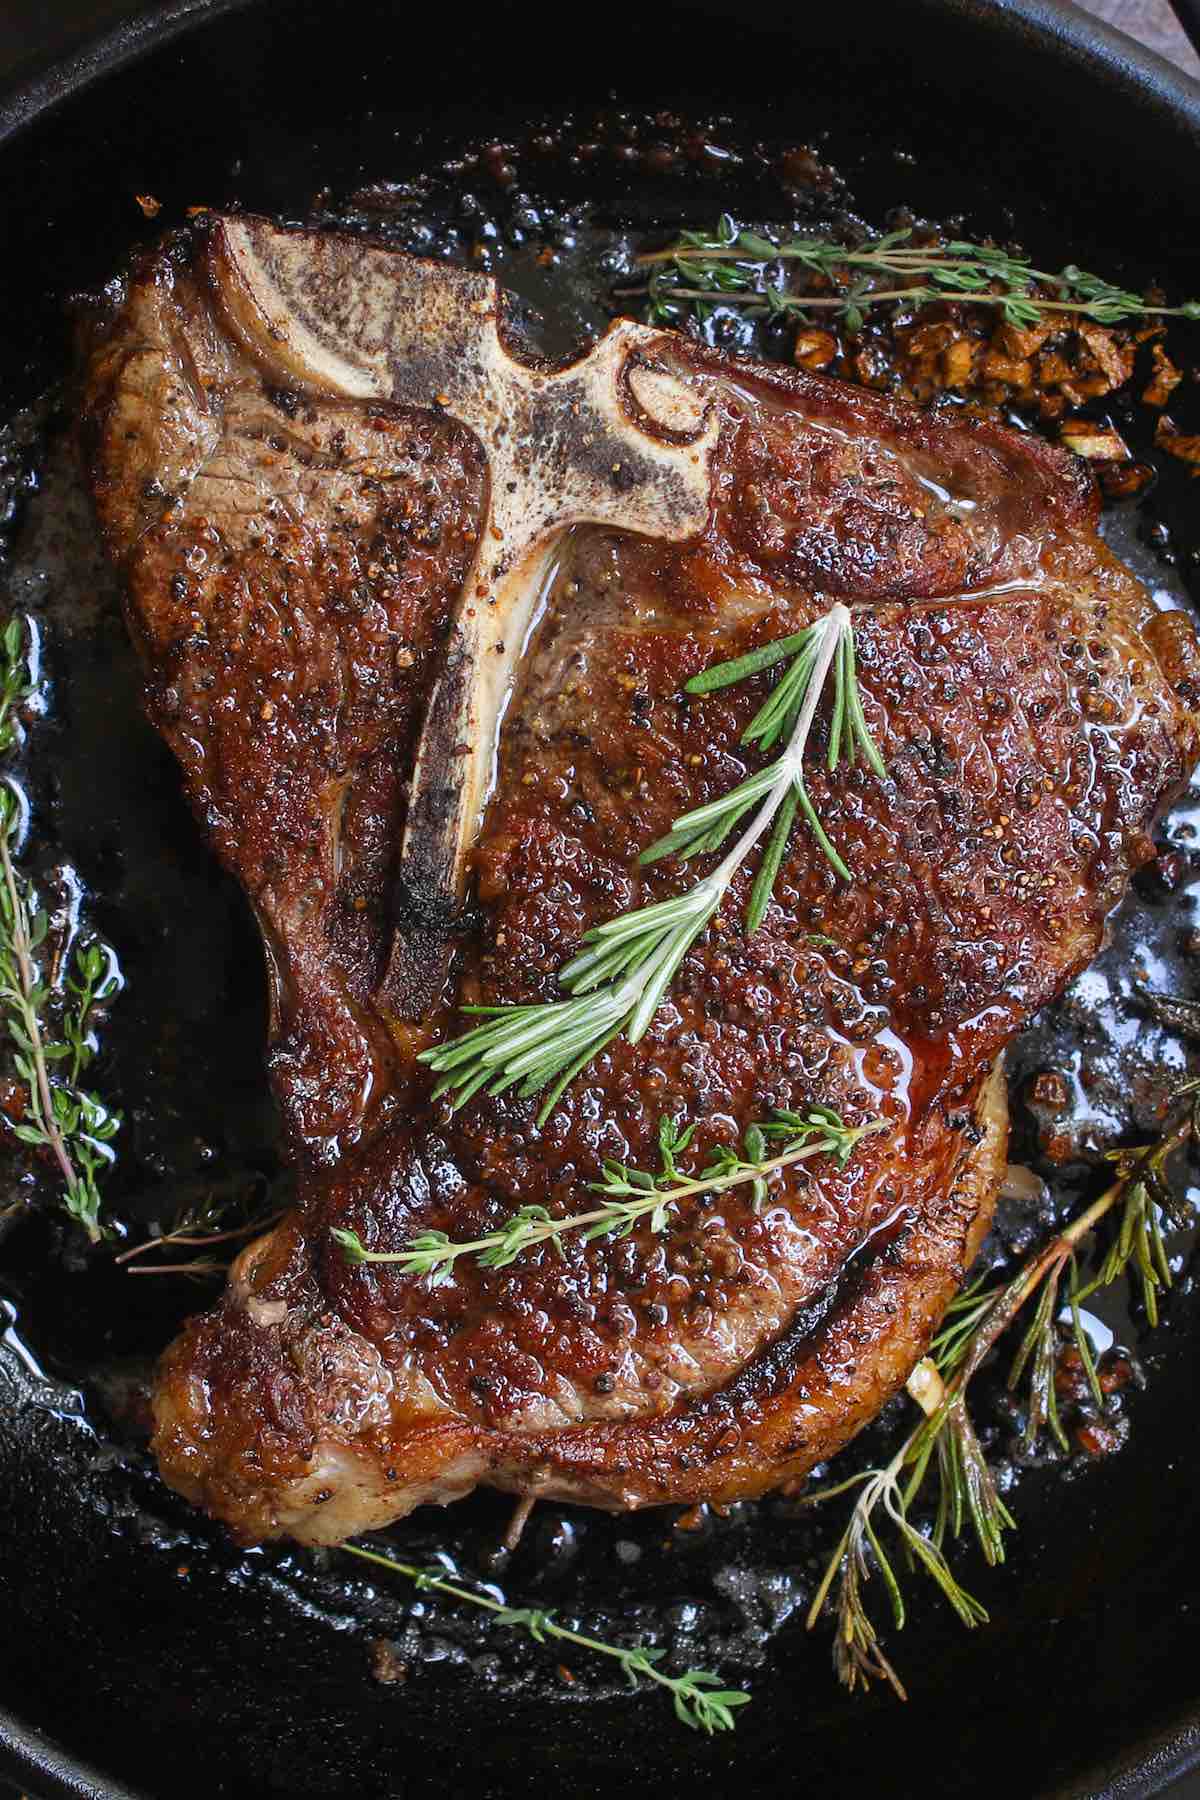 Pan seared T-bone Steak in a cast-iron pan showing a beautiful golden crust with sprigs of fresh rosemary and thyme on top for garnish